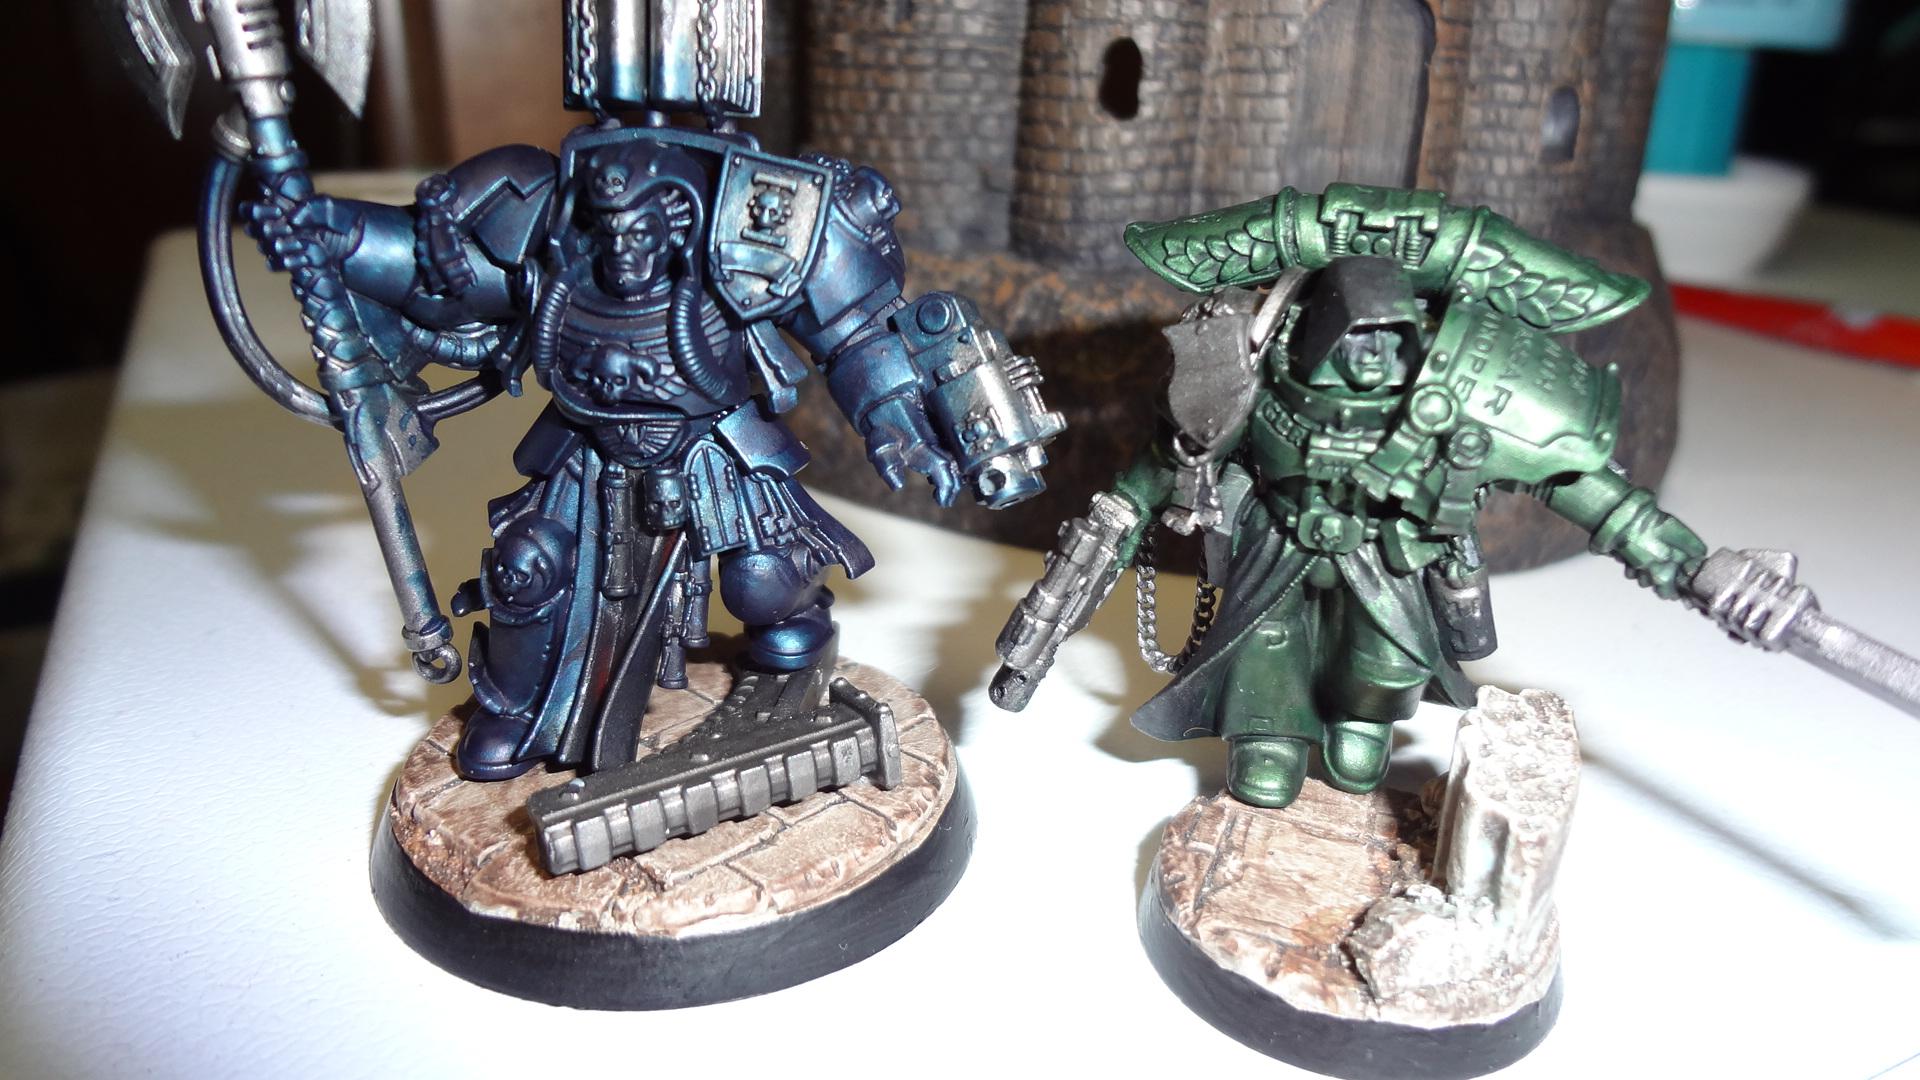 I like the contrast each model sets up by comparison to the standard paintjob on the knights, as well as to each other